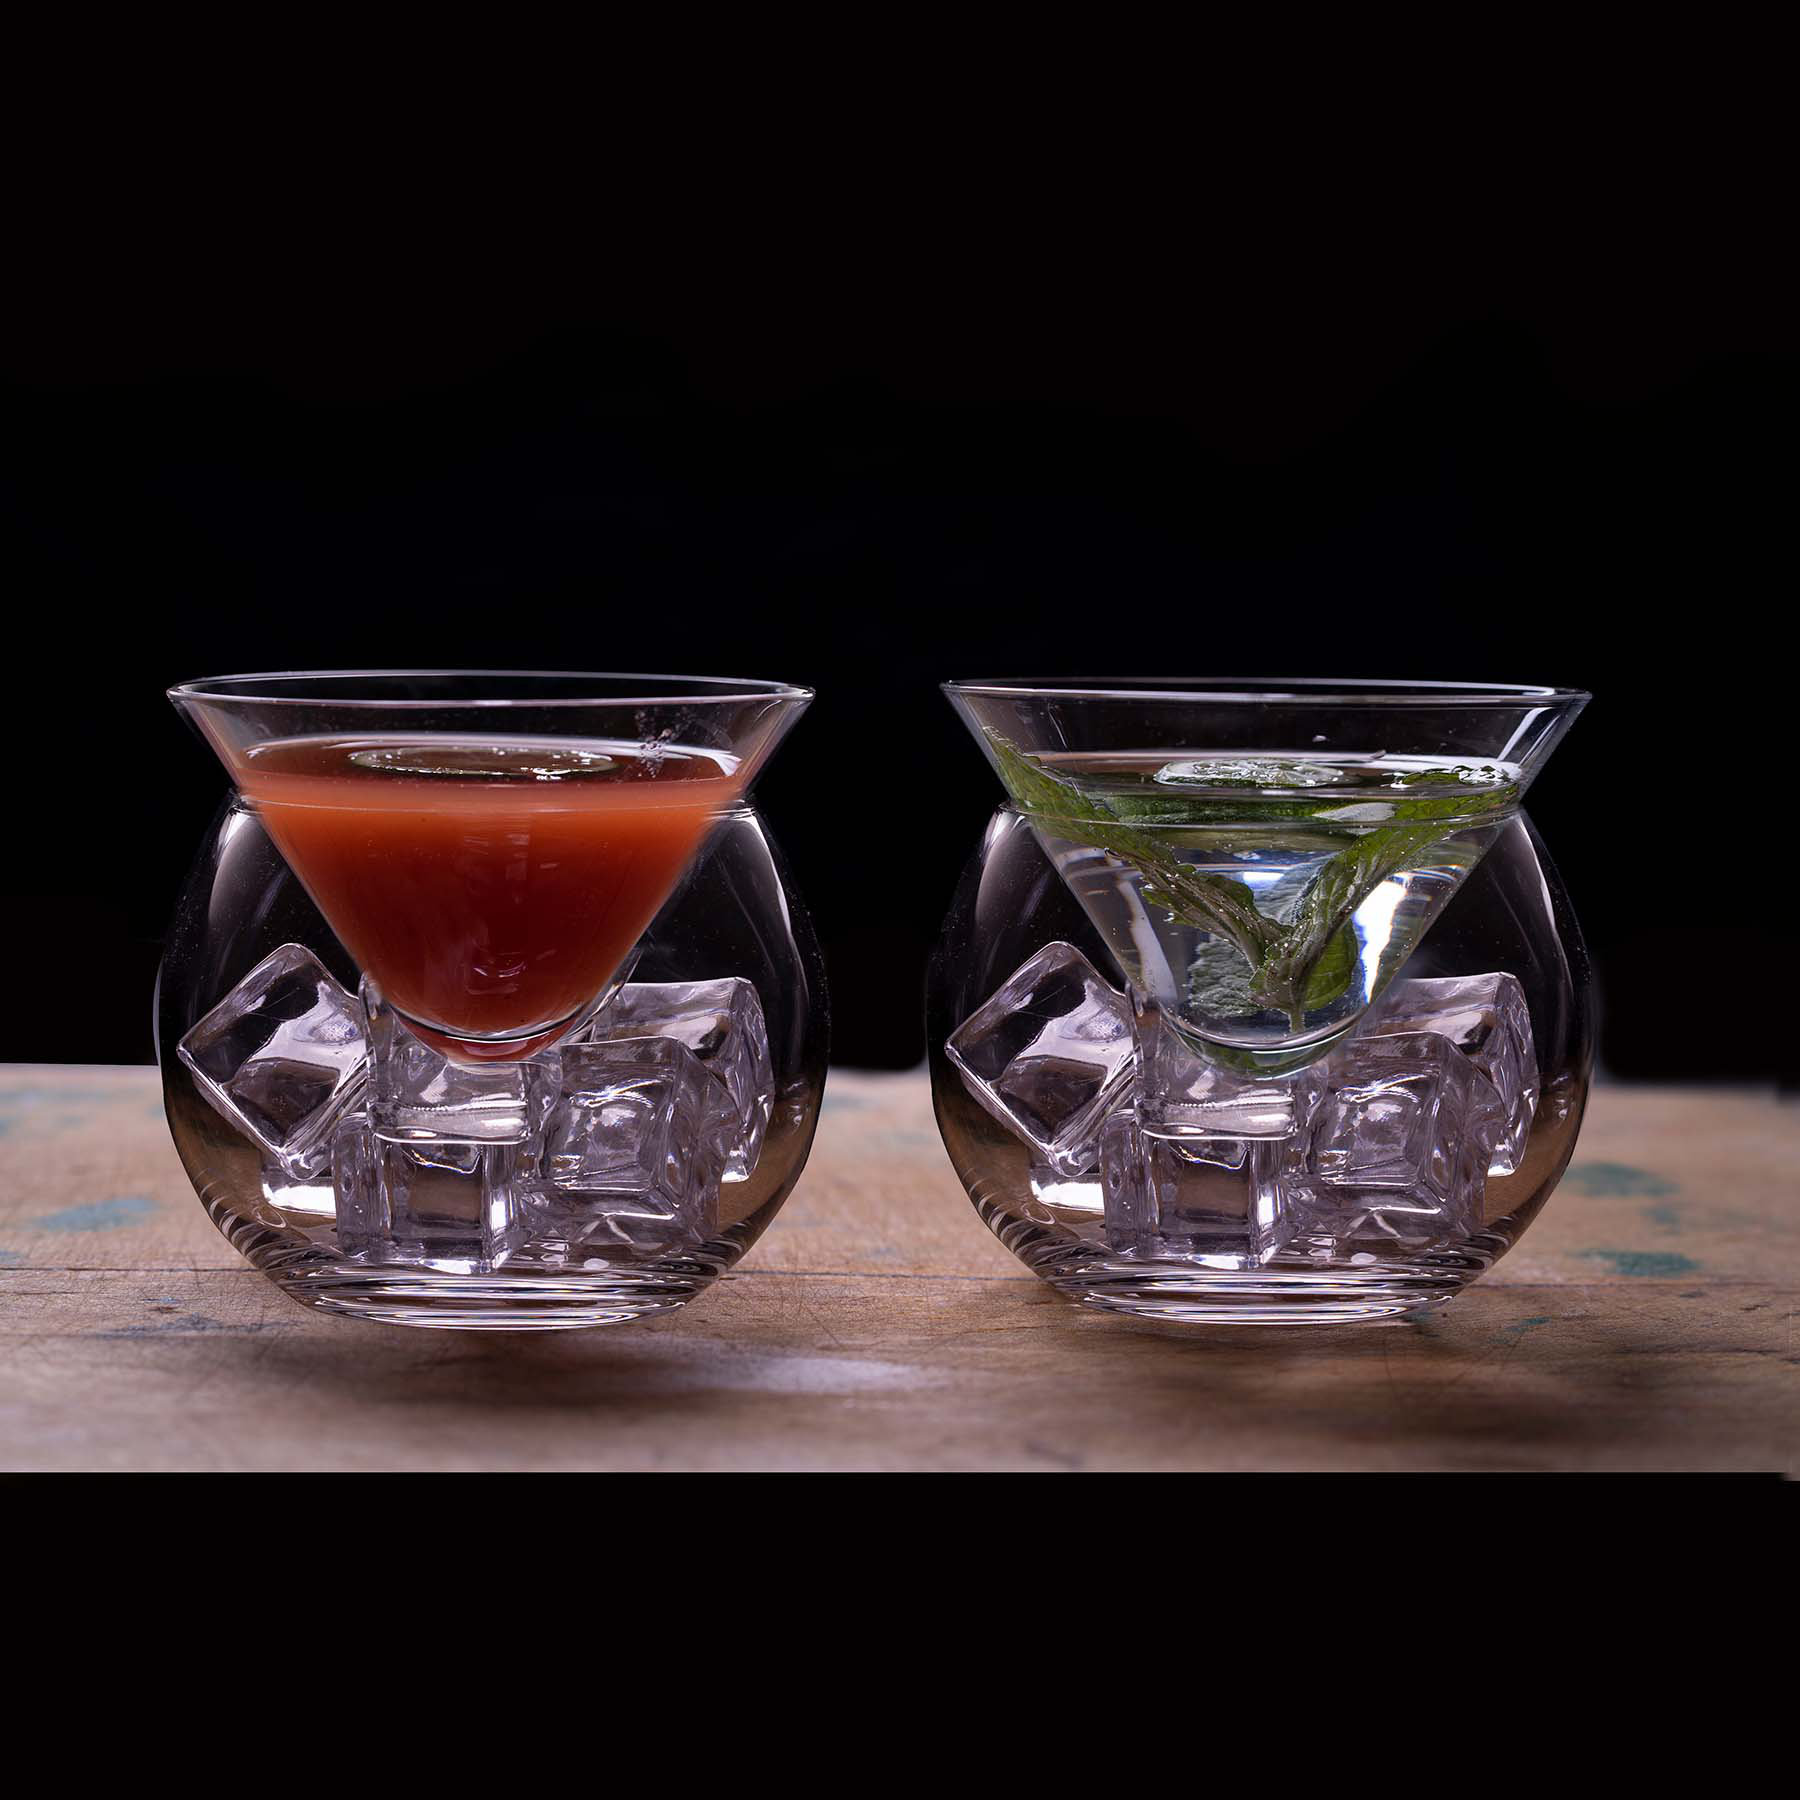 Loutros Stemless Martini Glasses With Chiller Set Of 2